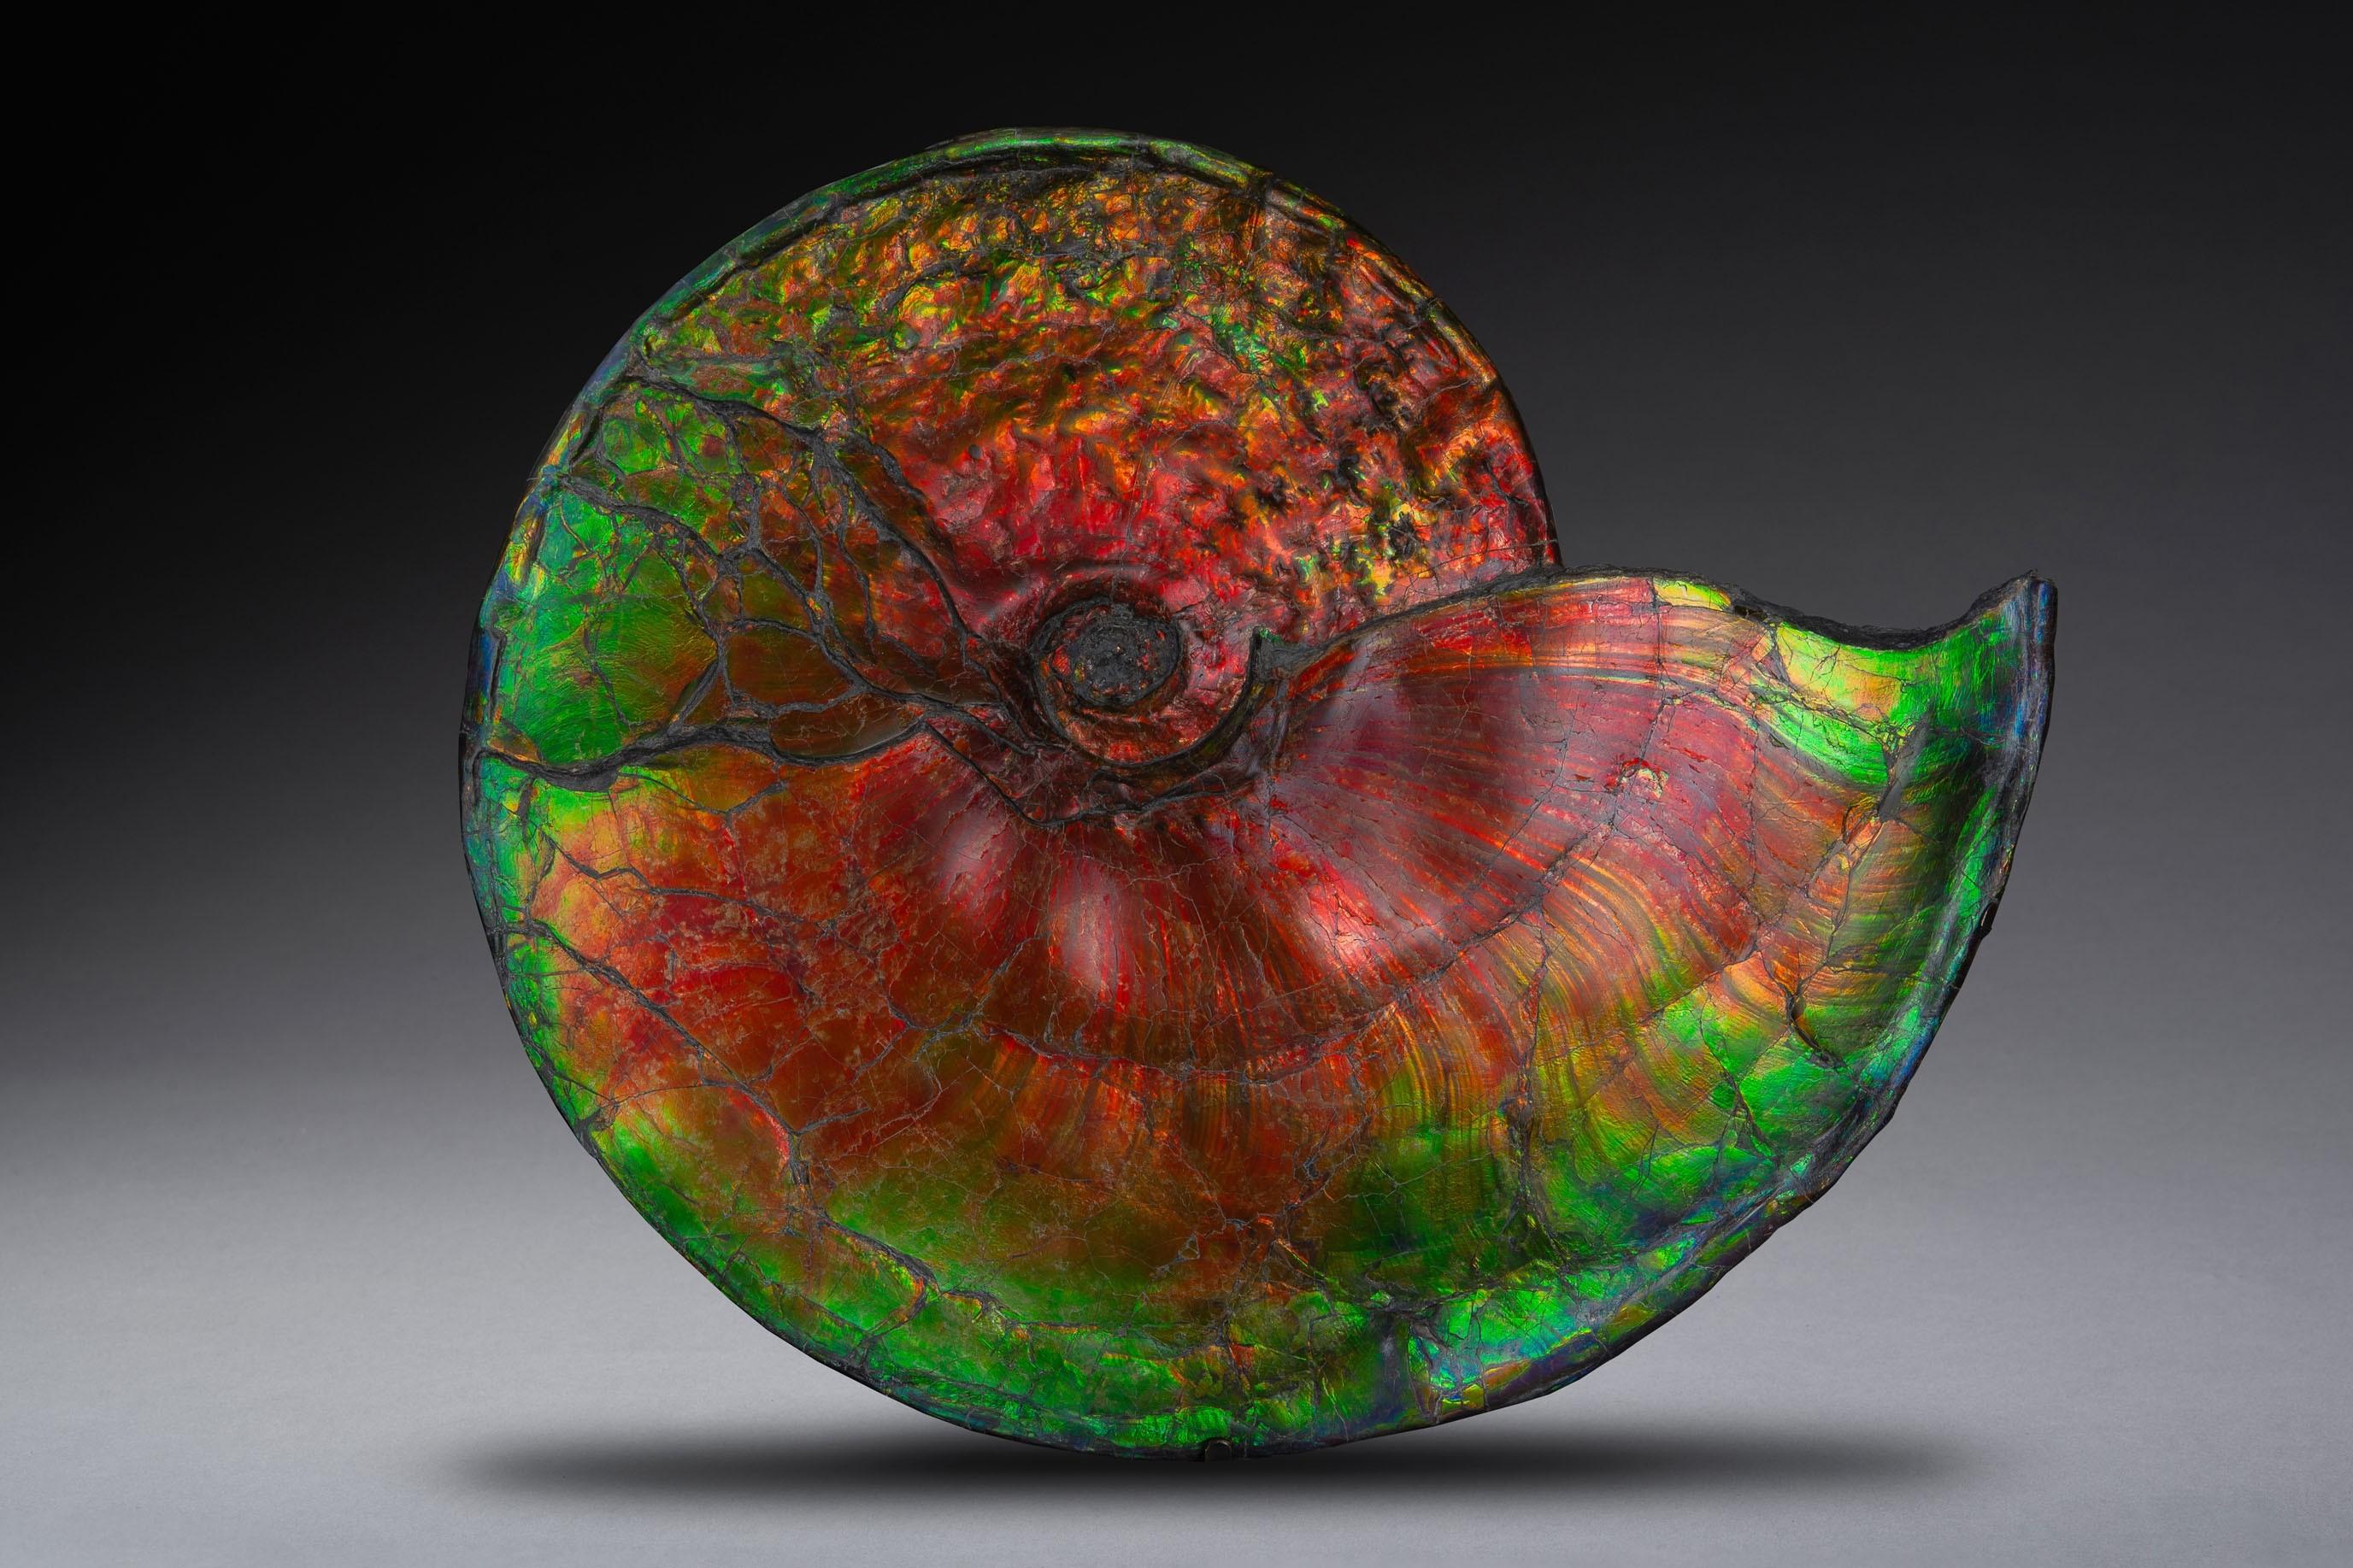 Unknown Abstract Sculpture - Extraordinary Giant Iridescent Ammonite Fossil